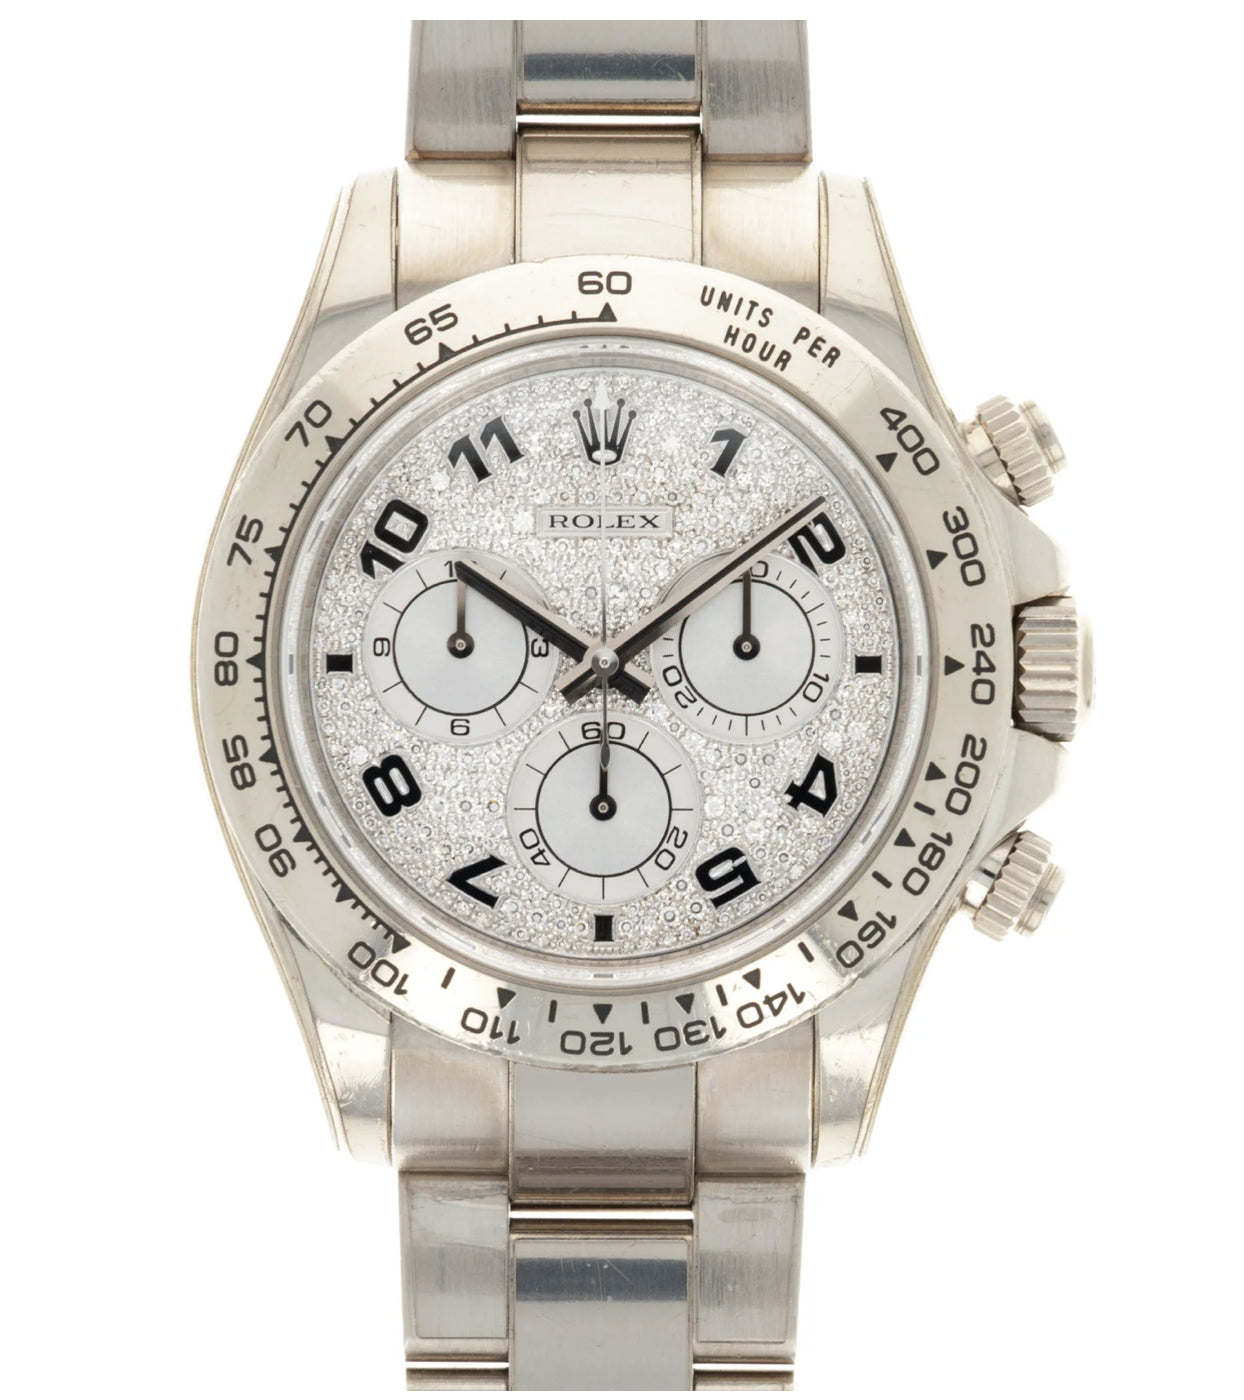 Rolex - Rolex White Gold Daytona Ref. 116509 with Pave Diamond Arabic Numeral Dial - The Keystone Watches